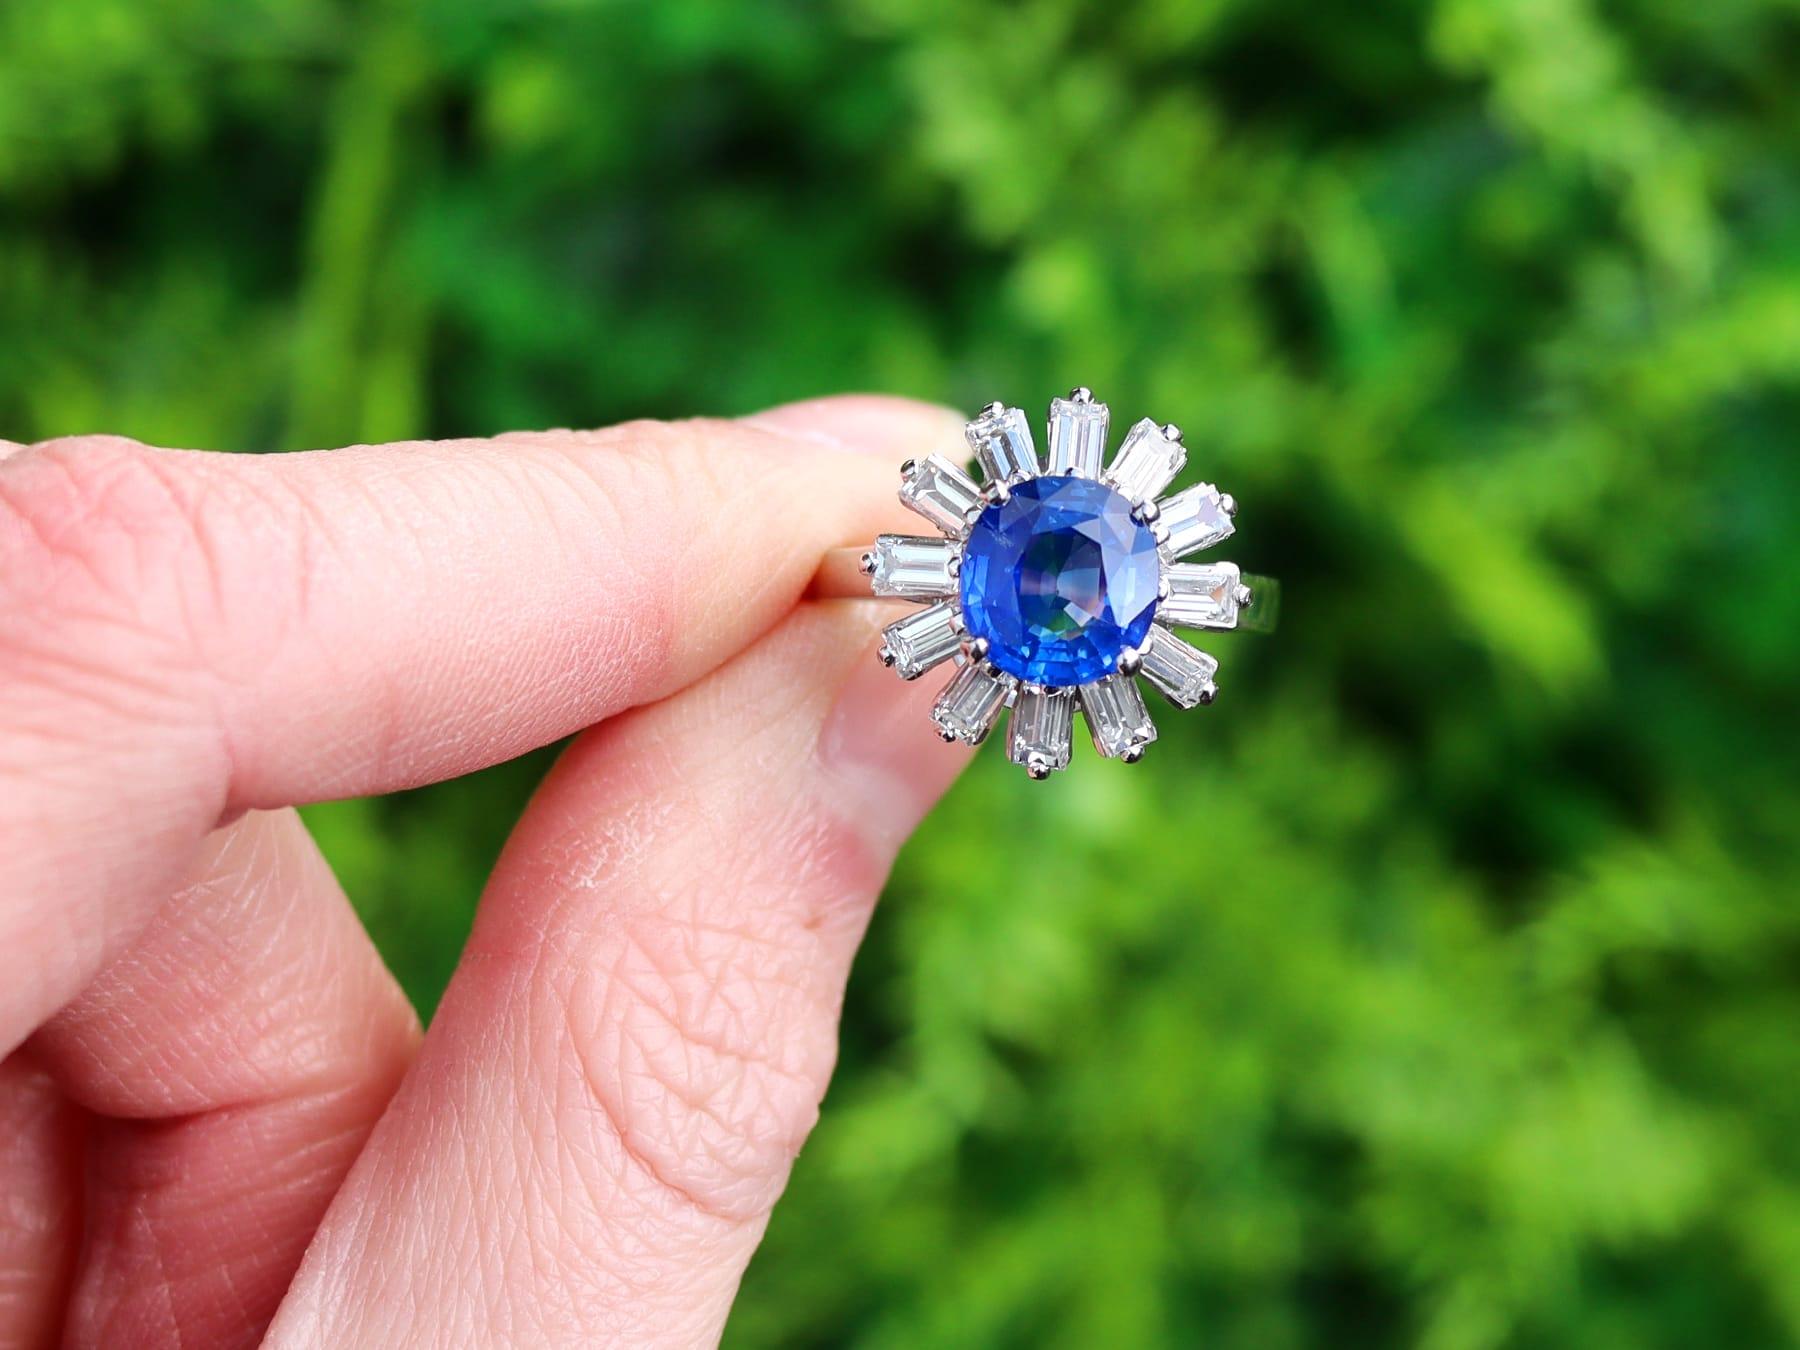 A stunning and impressive vintage 2.75 carat Ceylon sapphire and 1.65 carat diamond, platinum set dress ring; part of our diverse antique estate jewelry collections

This stunning, fine and impressive vintage sapphire ring has been crafted in